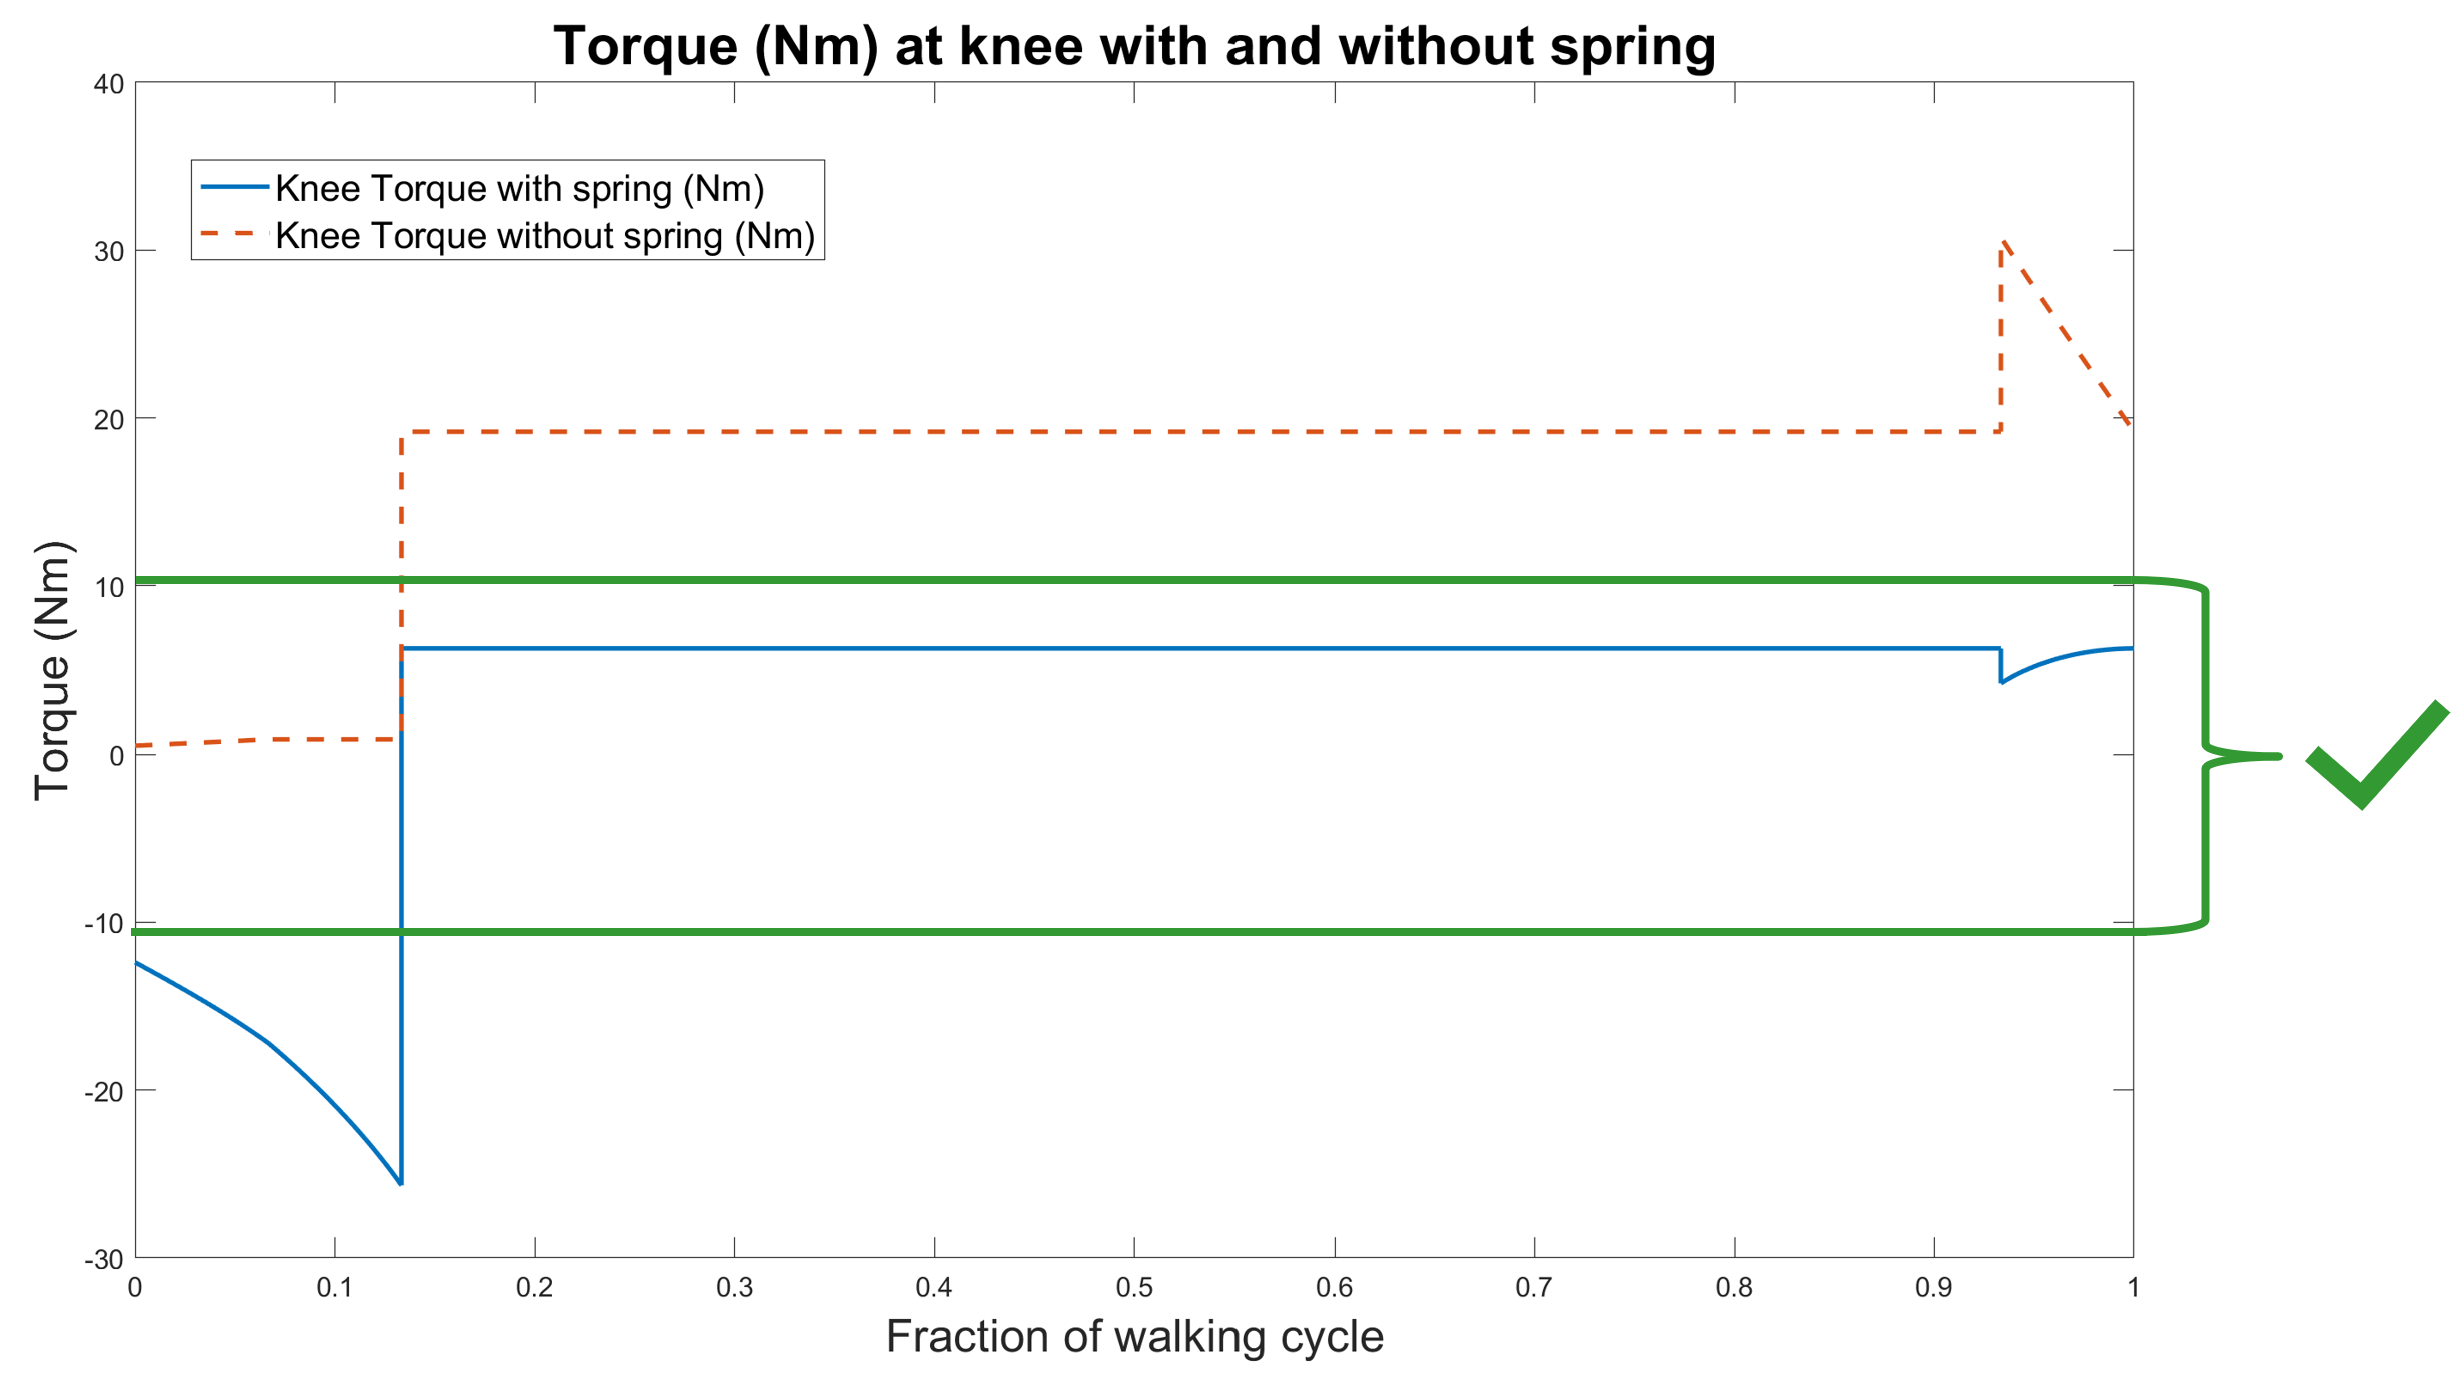 Figure showing various torque levels during walking